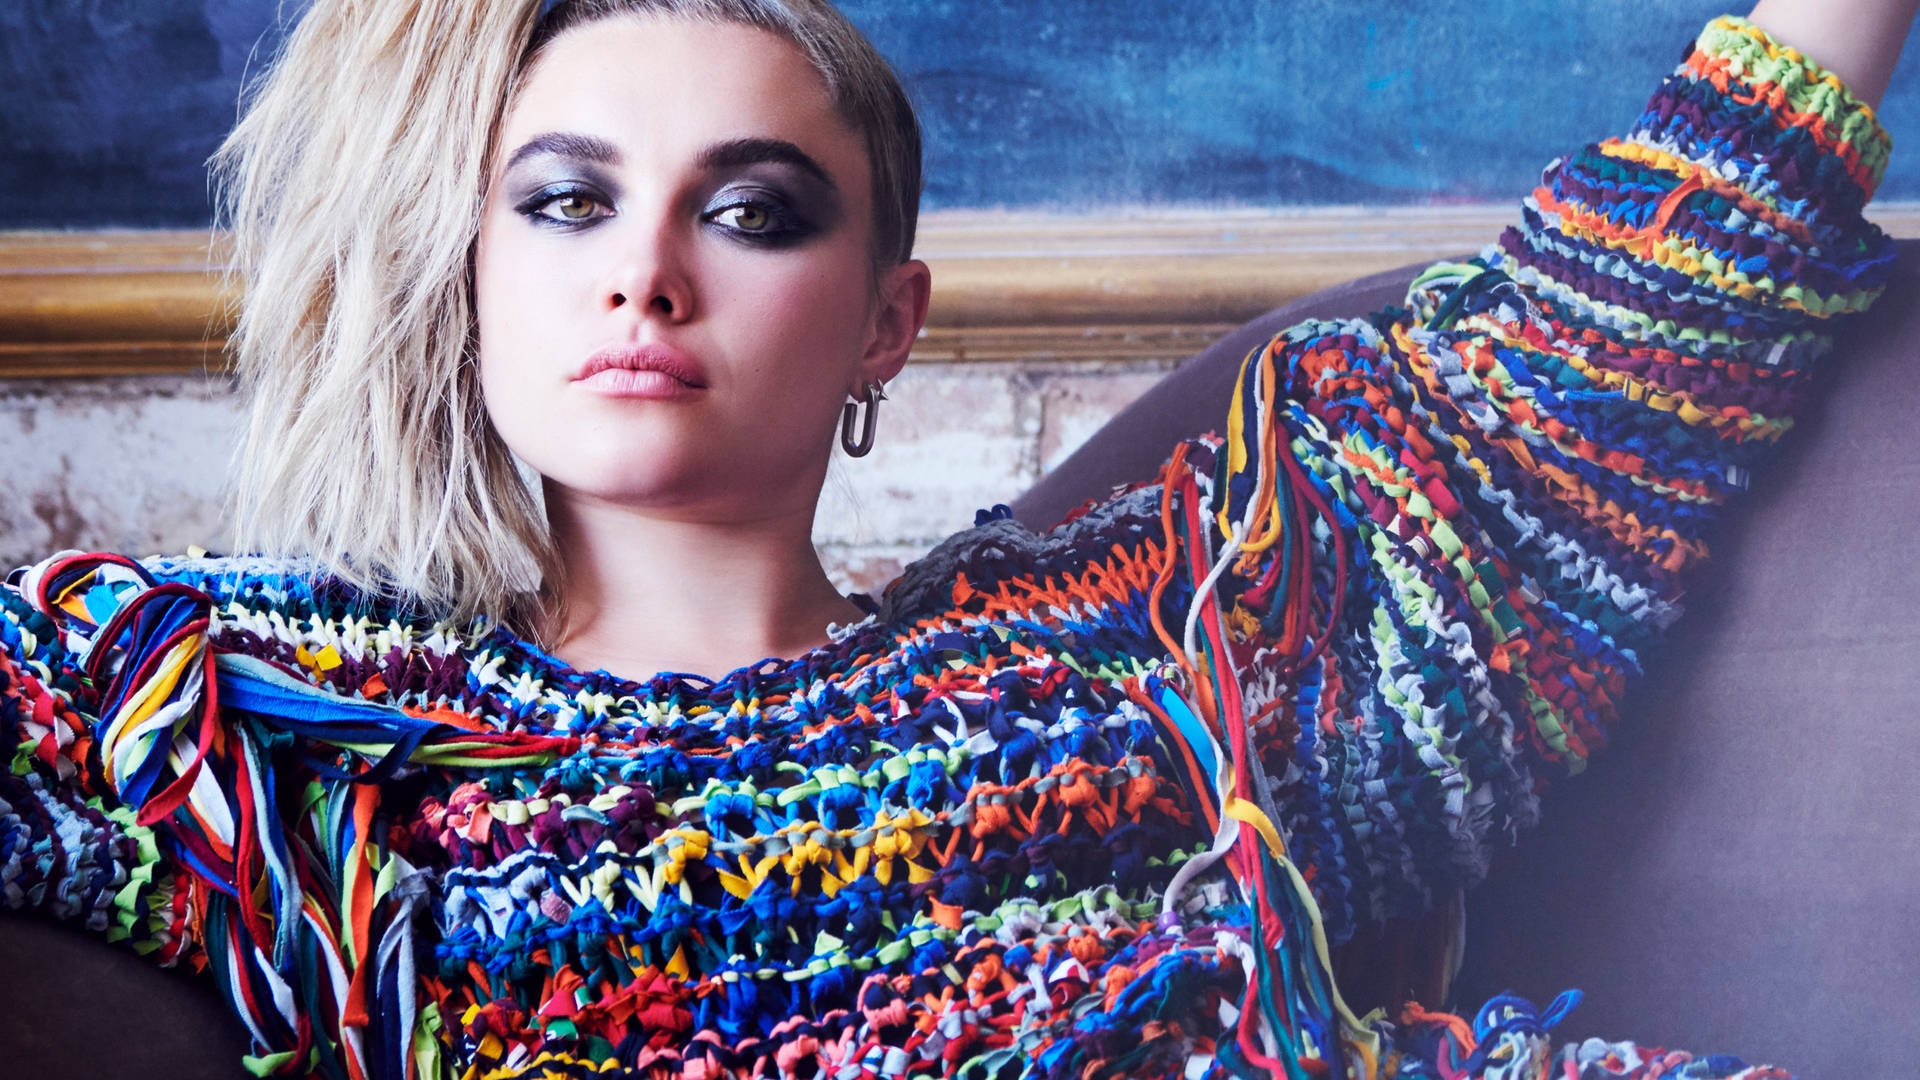 Florence Pugh In Crocheted Sweater